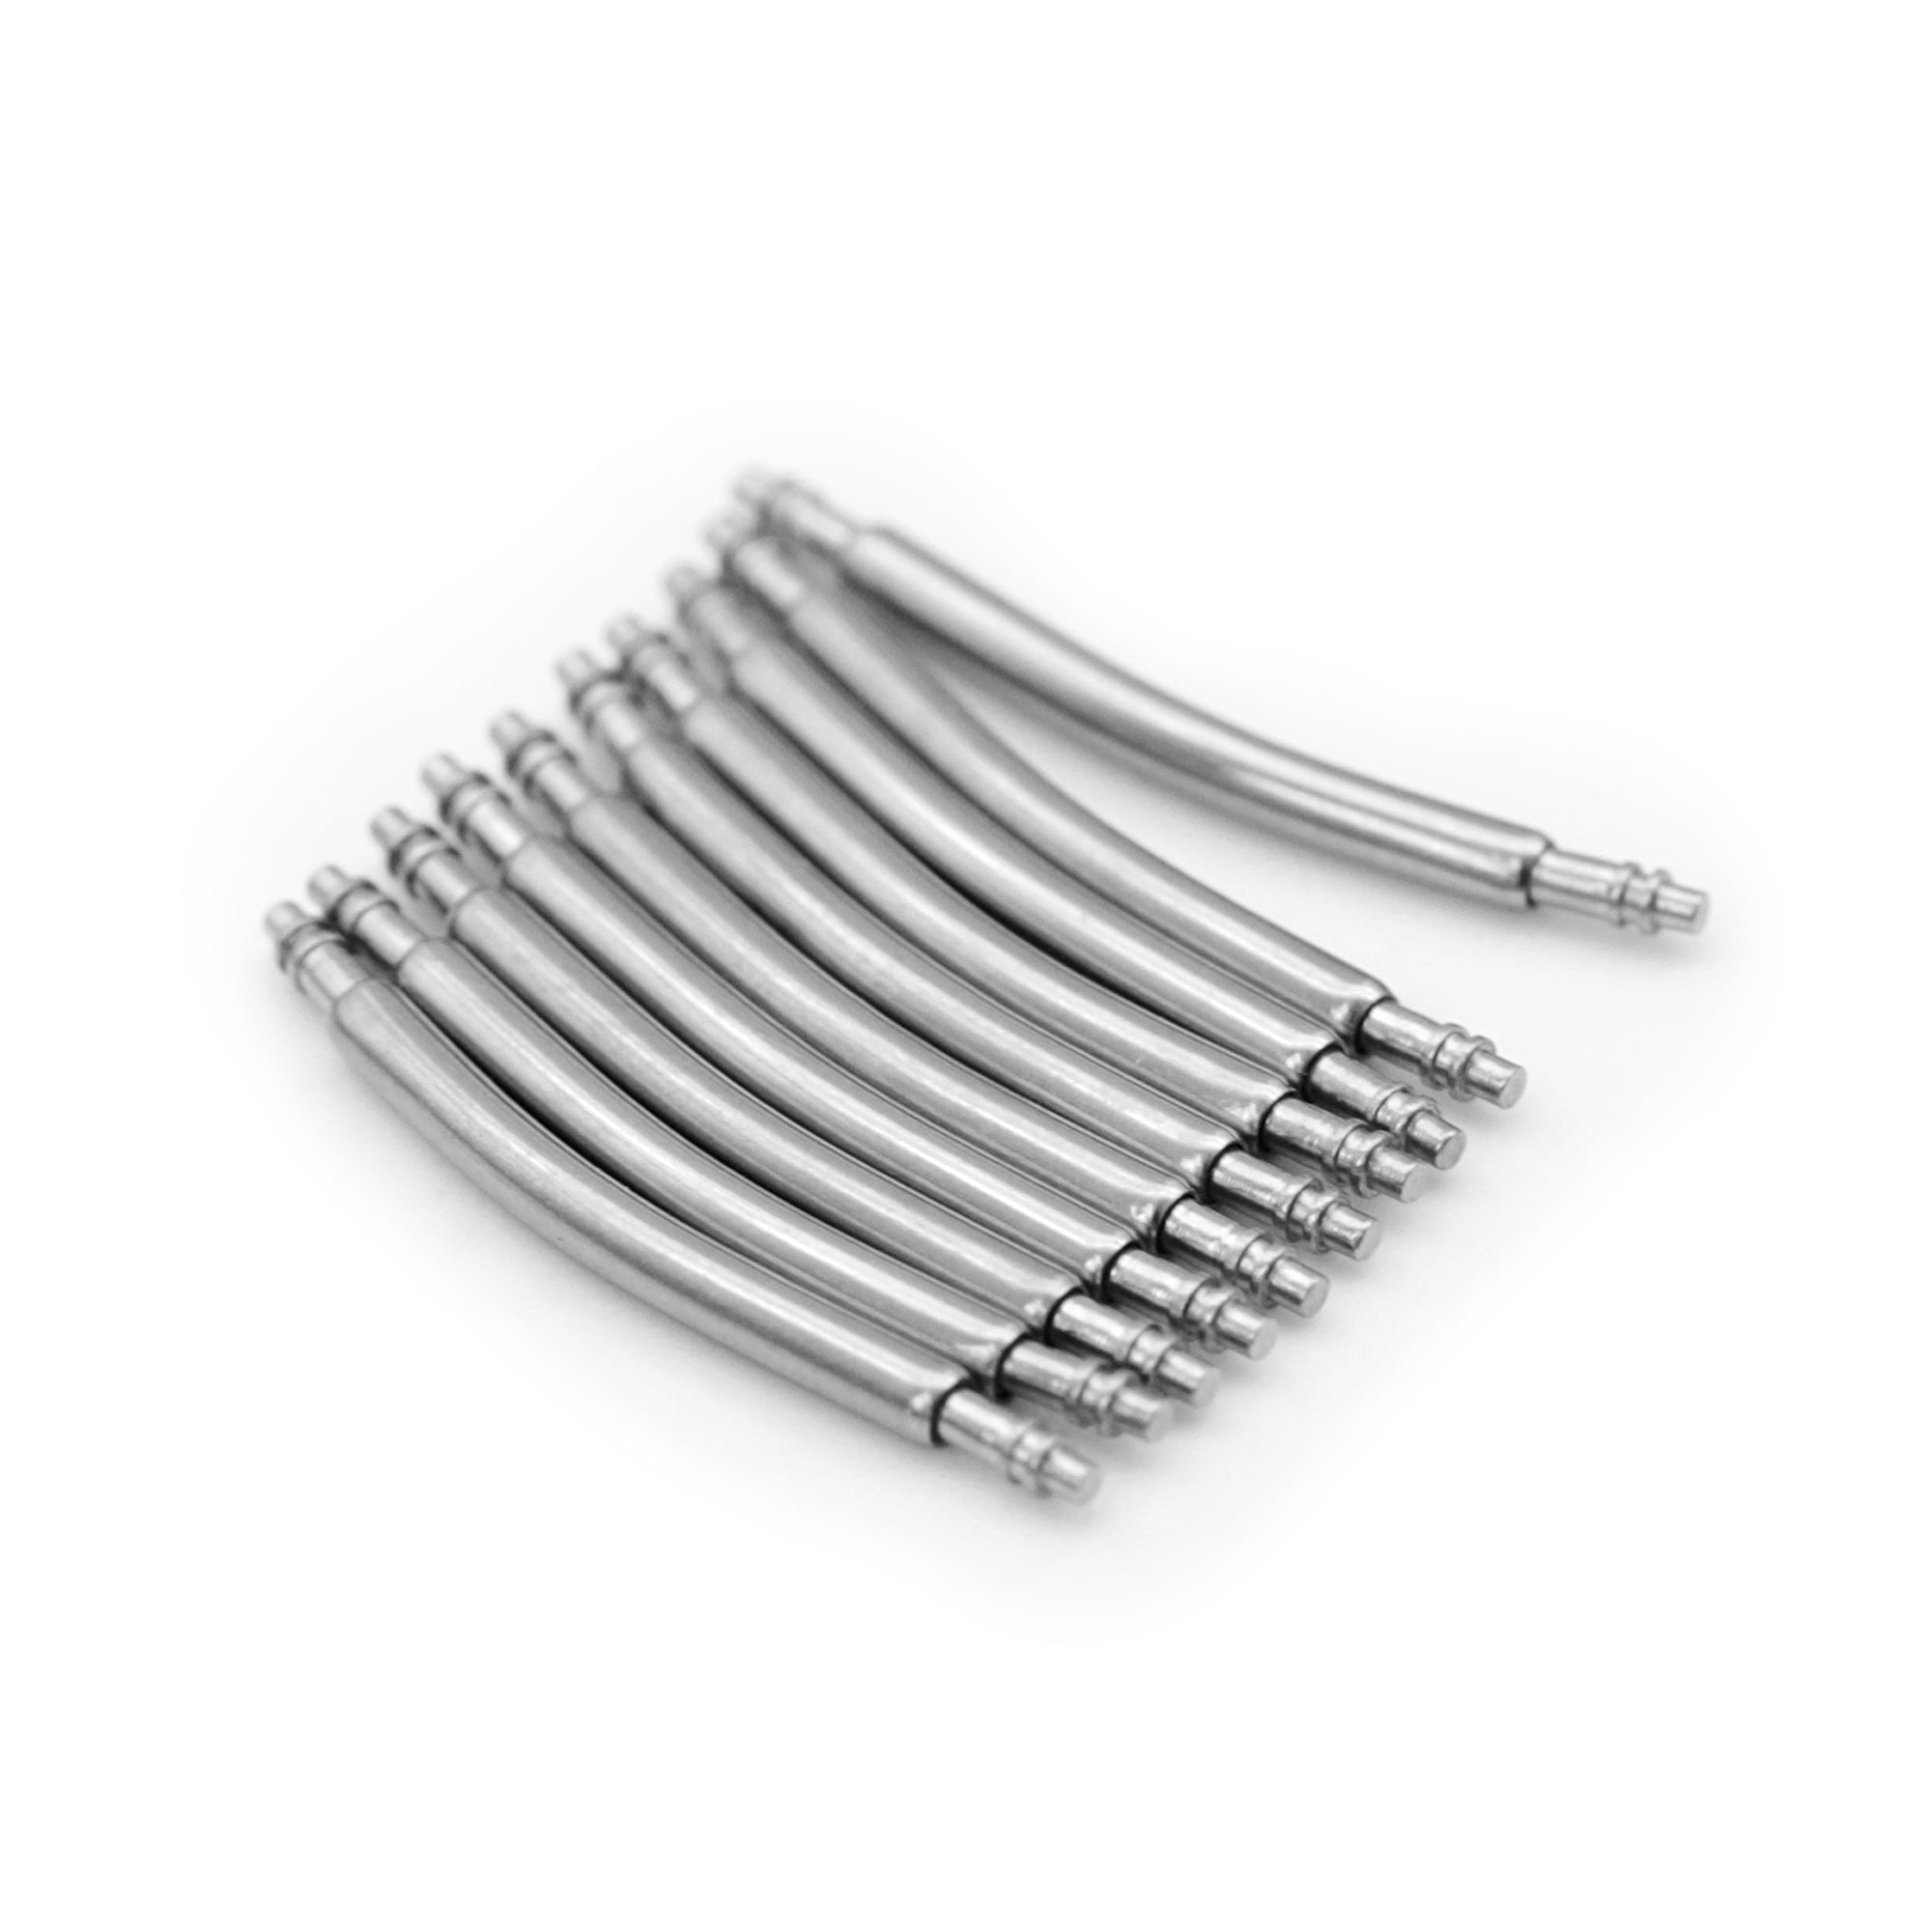 Curved Spring Bars Double Shoulder 1.50mm Dia. (pack of 20 pieces)